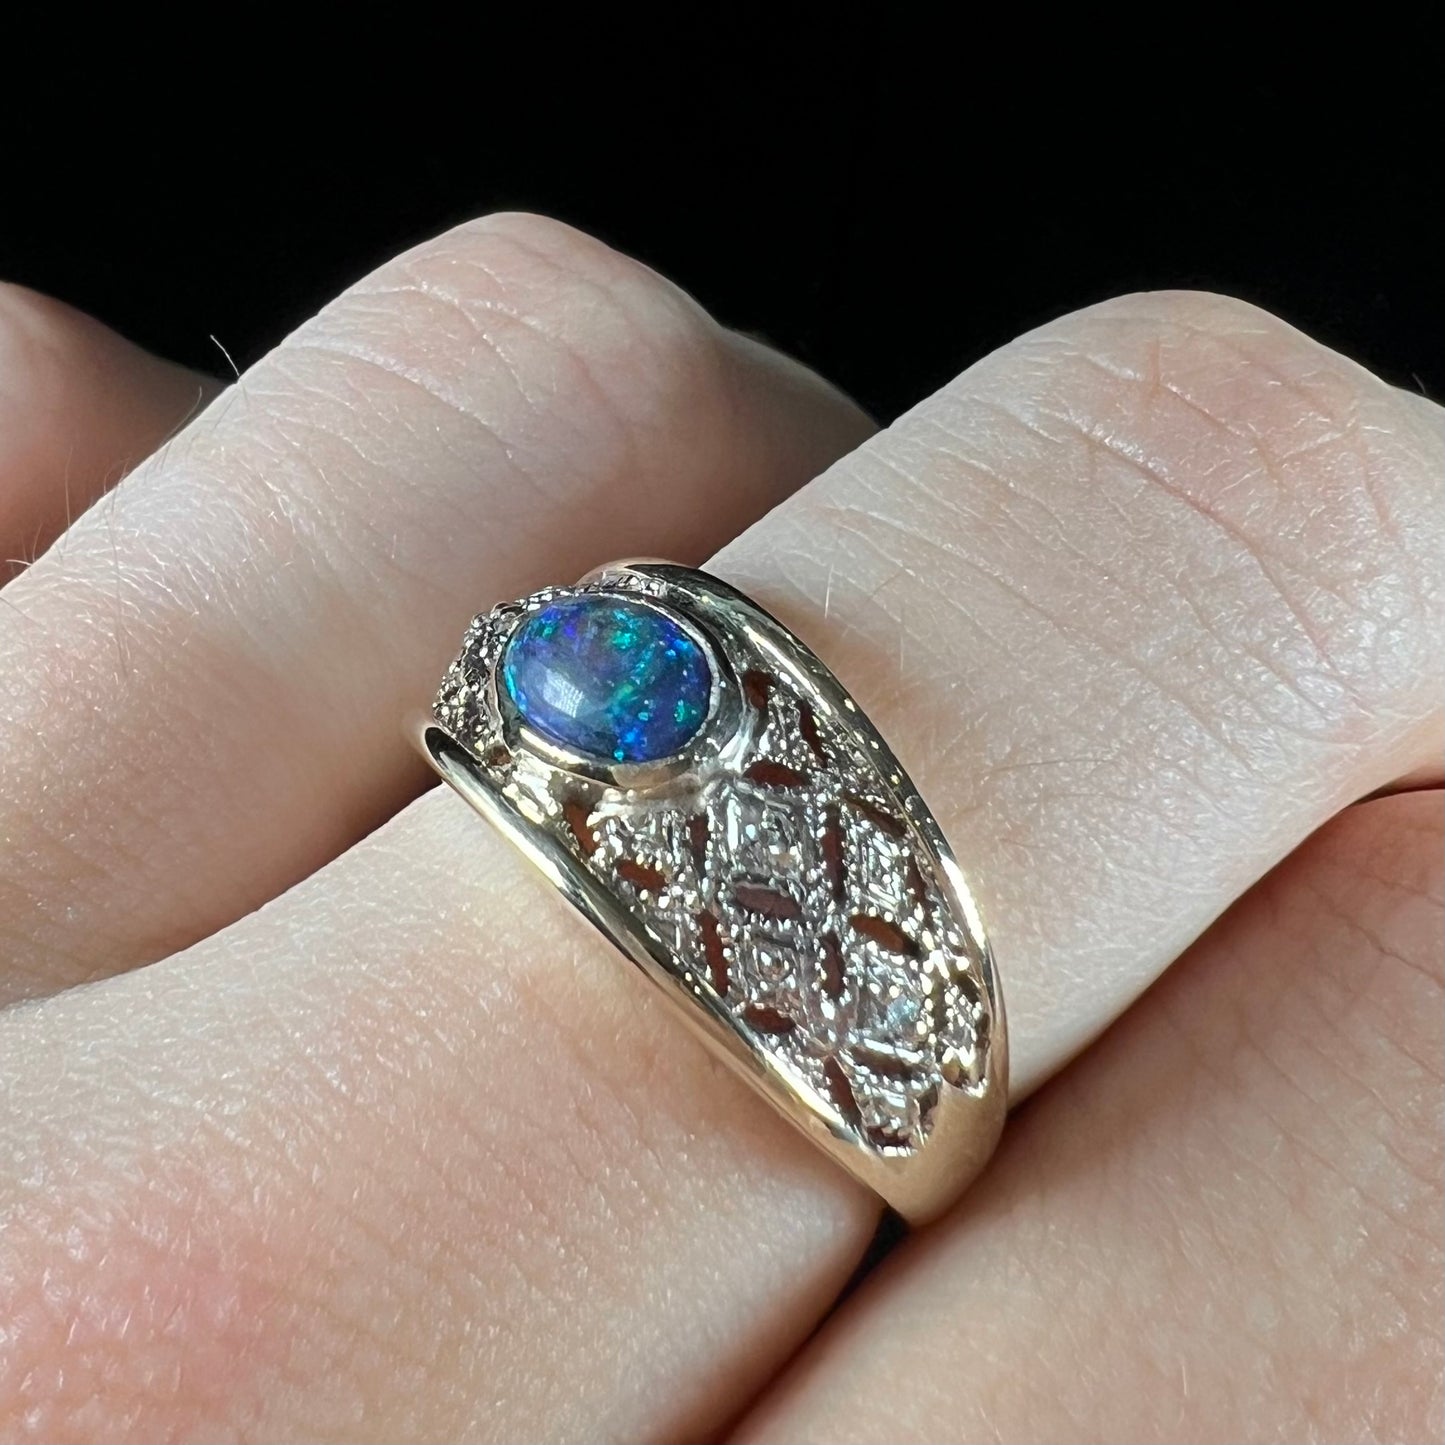 A ladies' yellow gold filigree style ring set with a natural black opal and diamond accents.